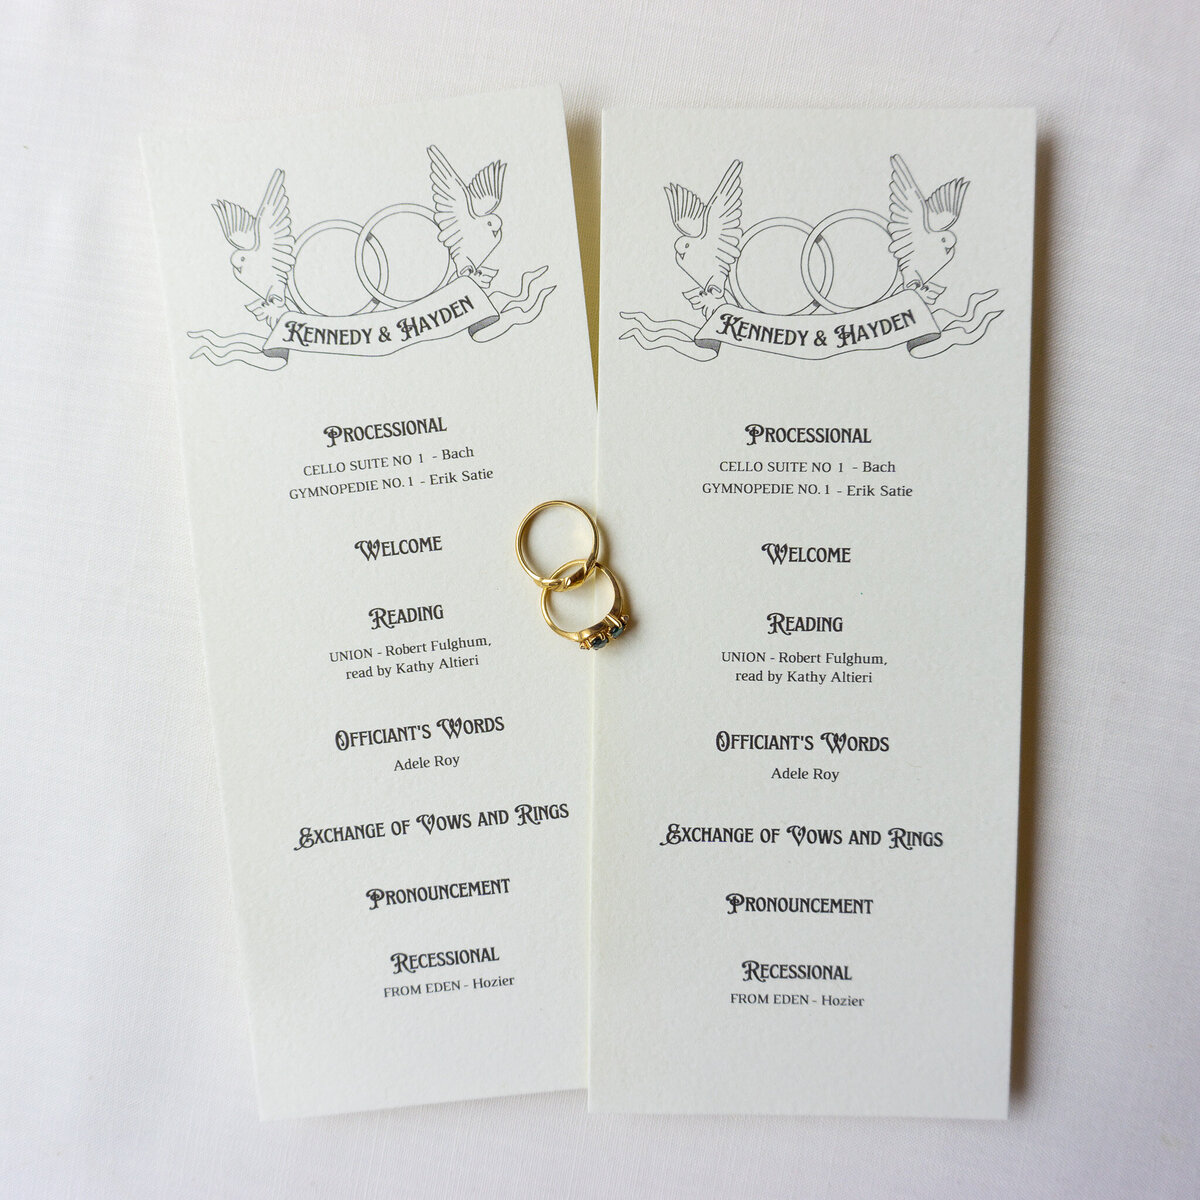 printed program wedding ceremony hand outs